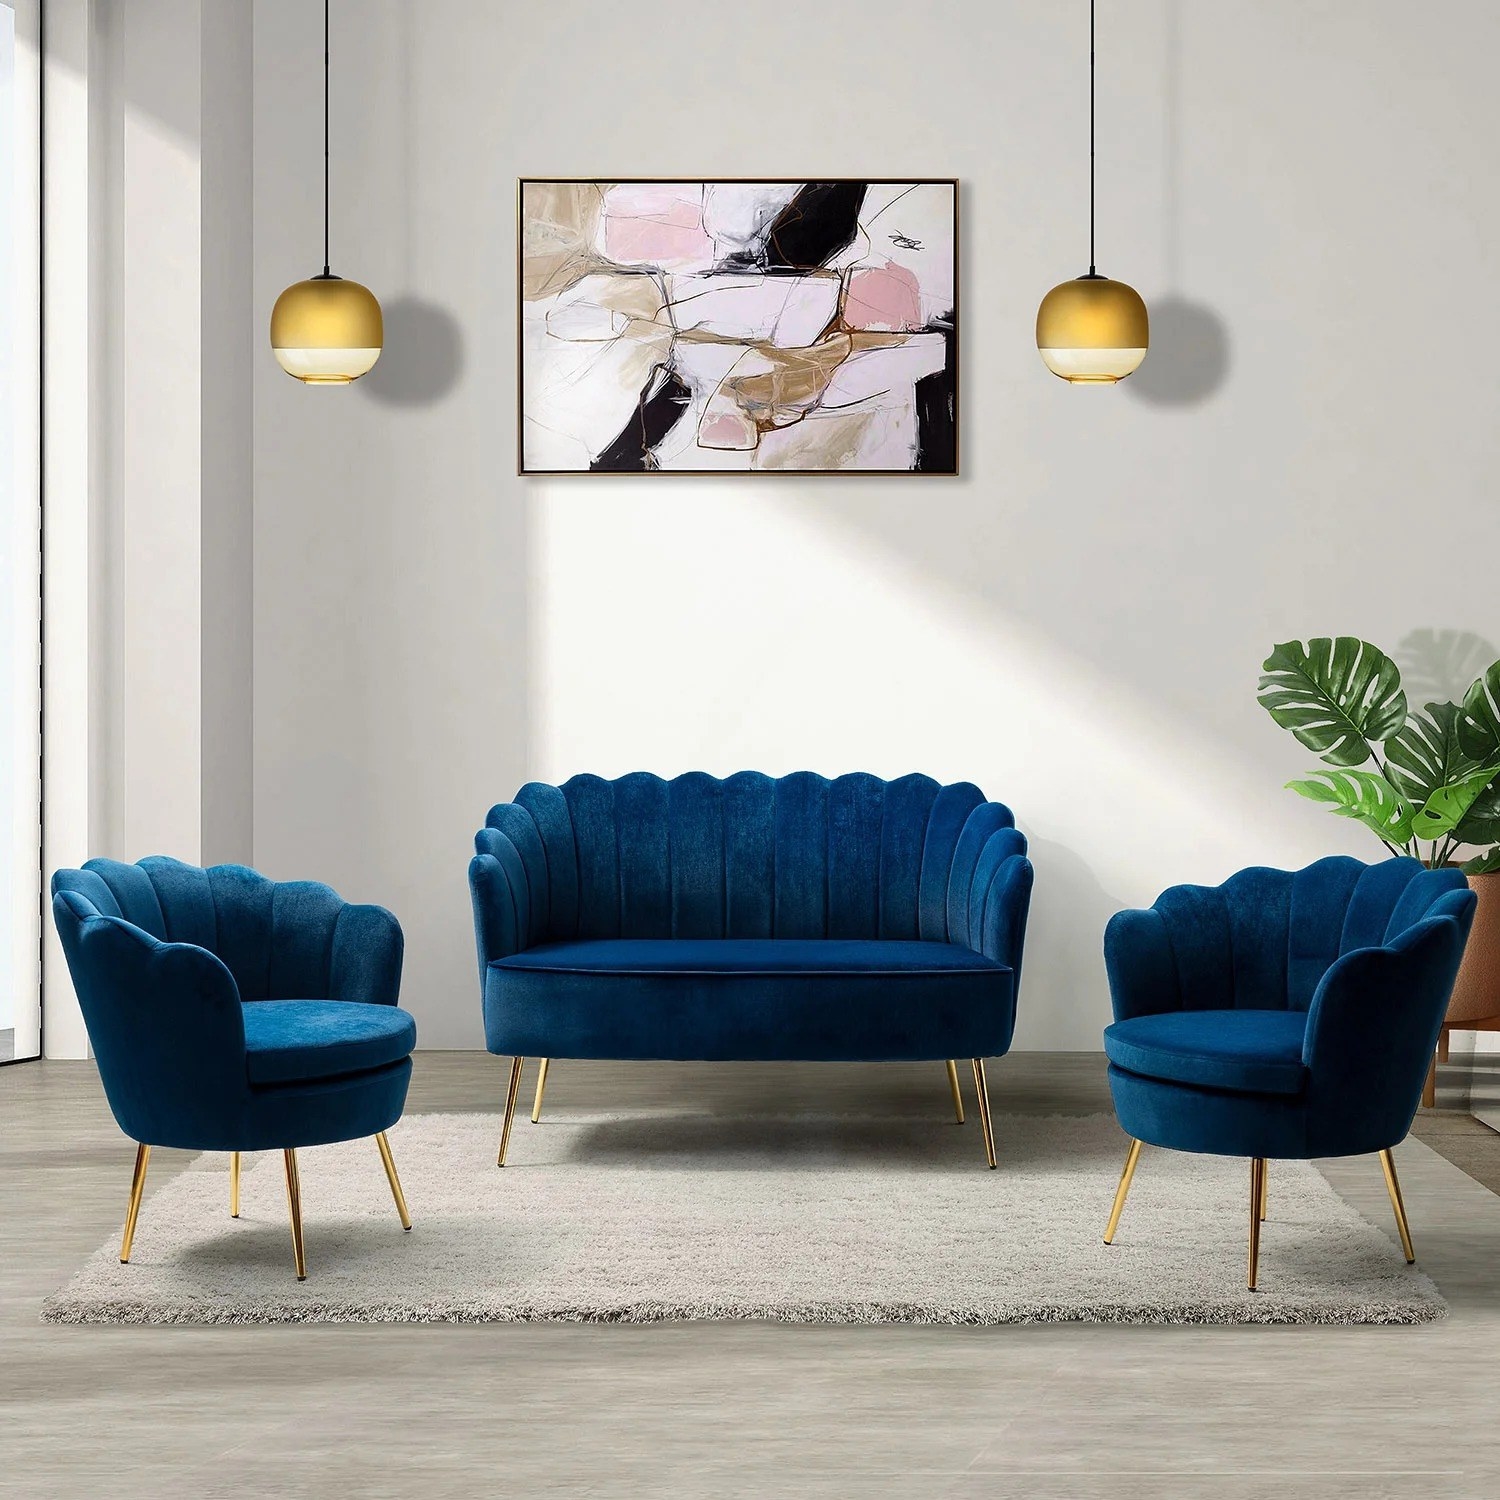 the blue loveseat with matching blue chairs